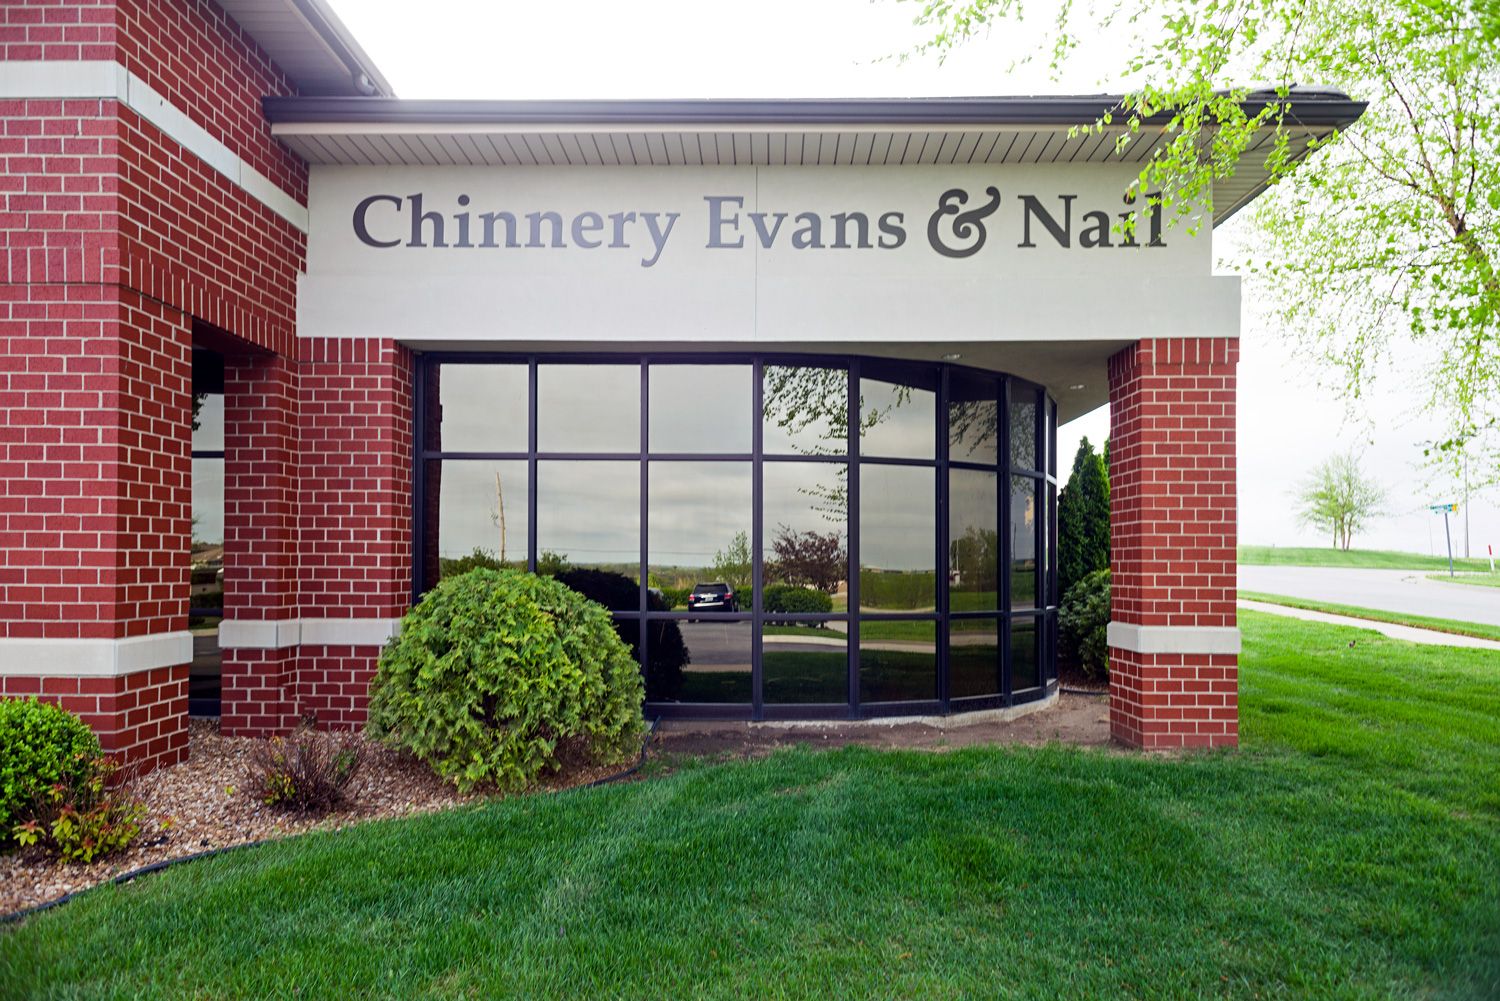 chinnery evans and nail office